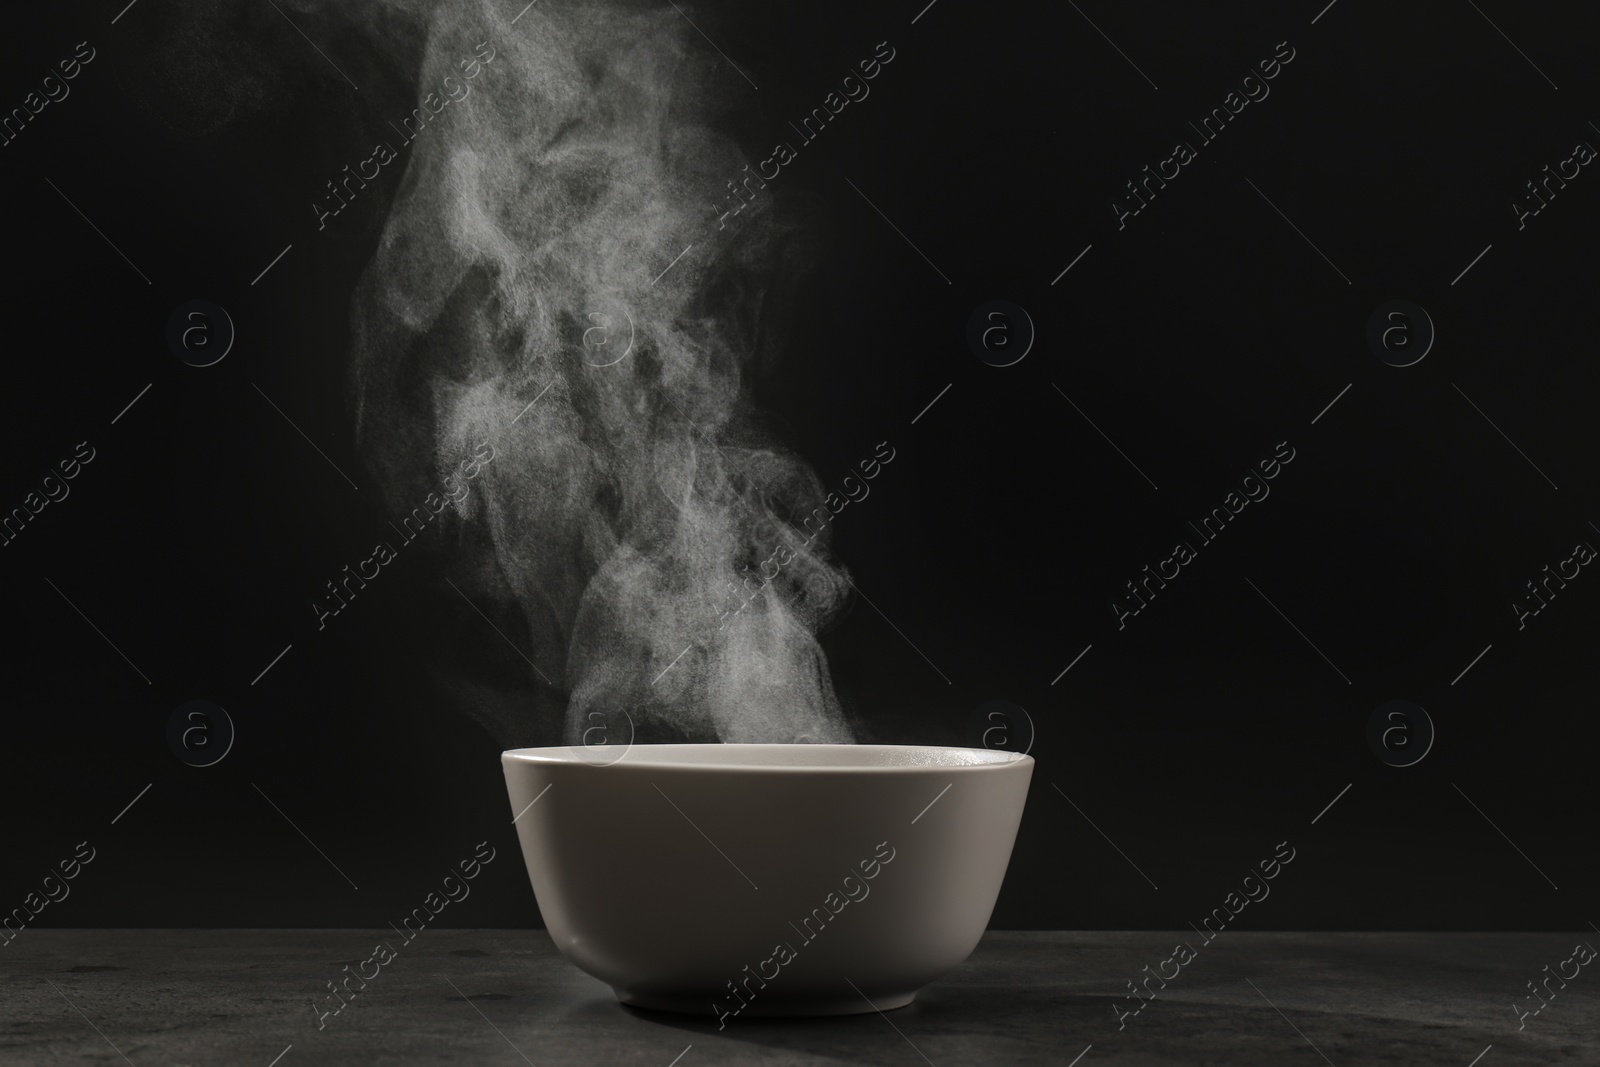 Photo of Steaming ceramic bowl on grey table against dark background